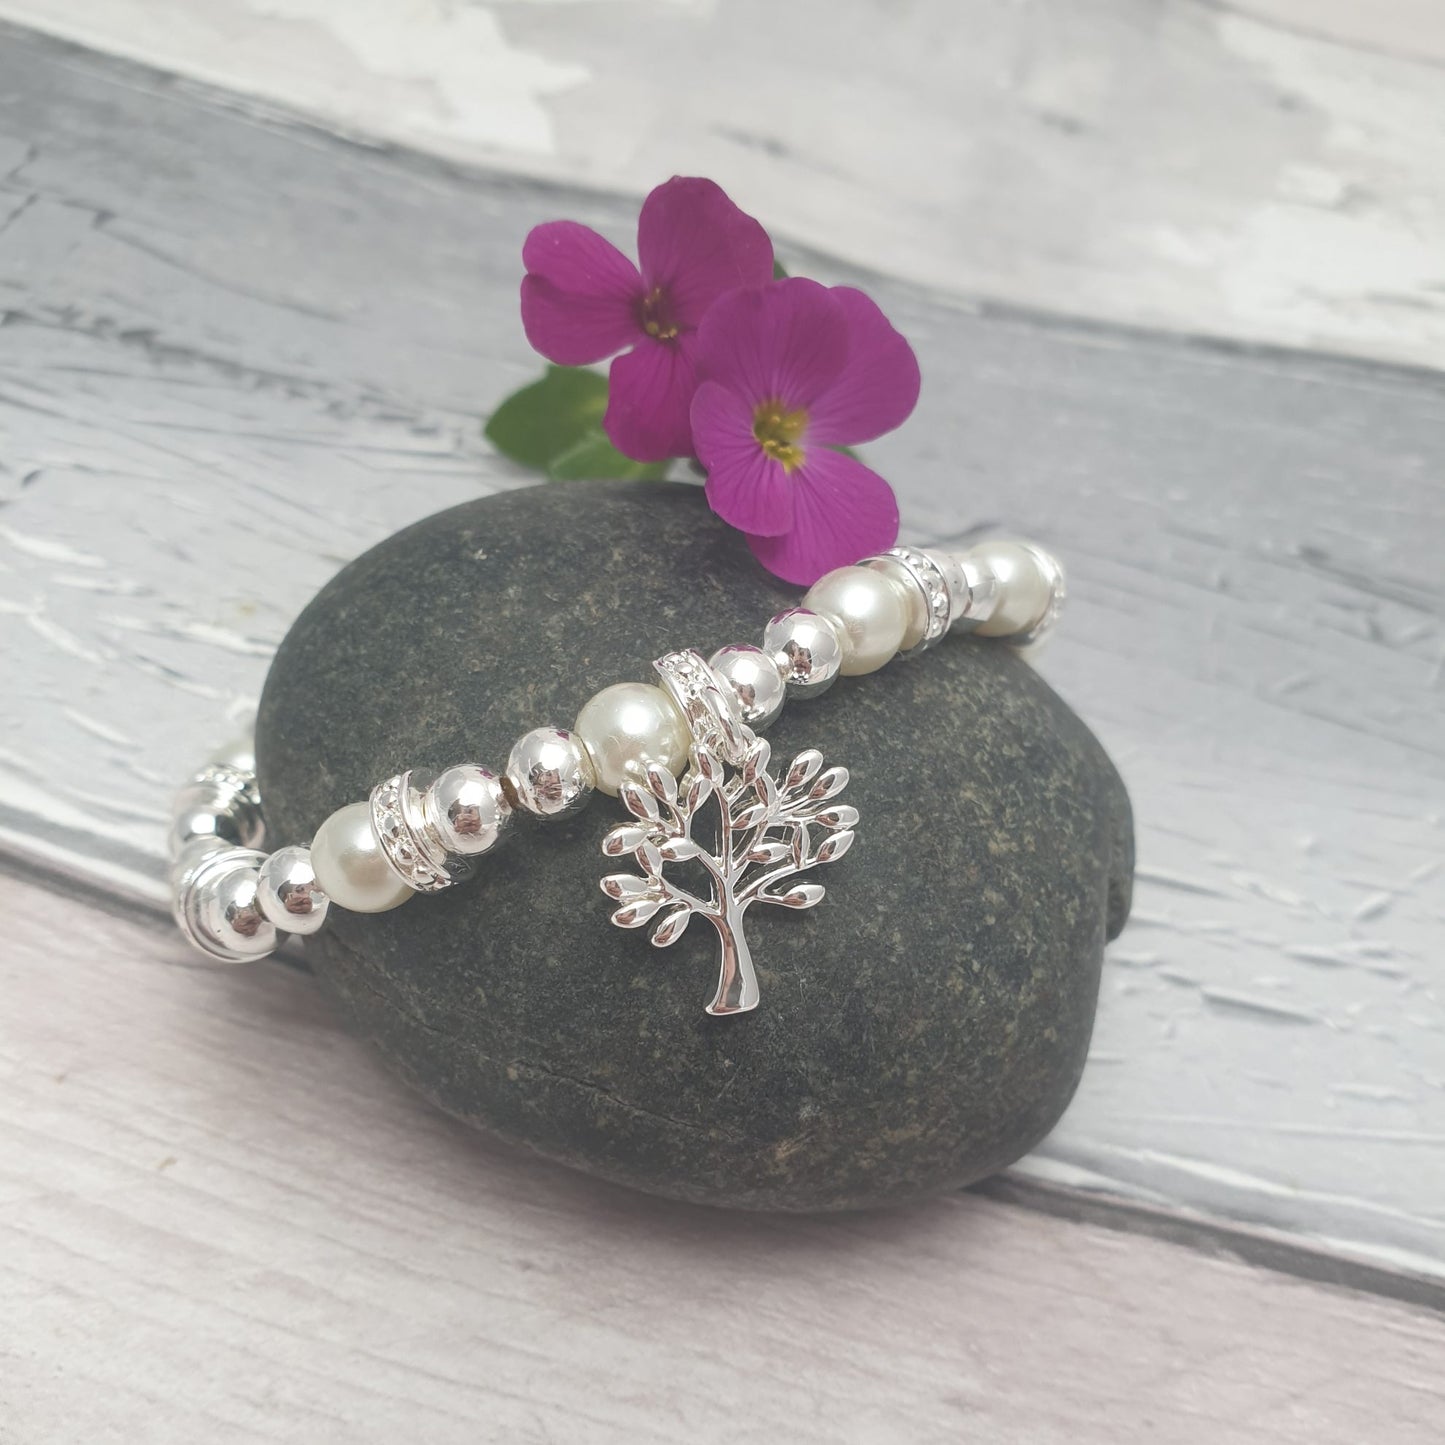 A silver and pearl Stretch bracelet with diamante covered spacers. Hanging from the bracelet is a silver covered Tree of Life charm.